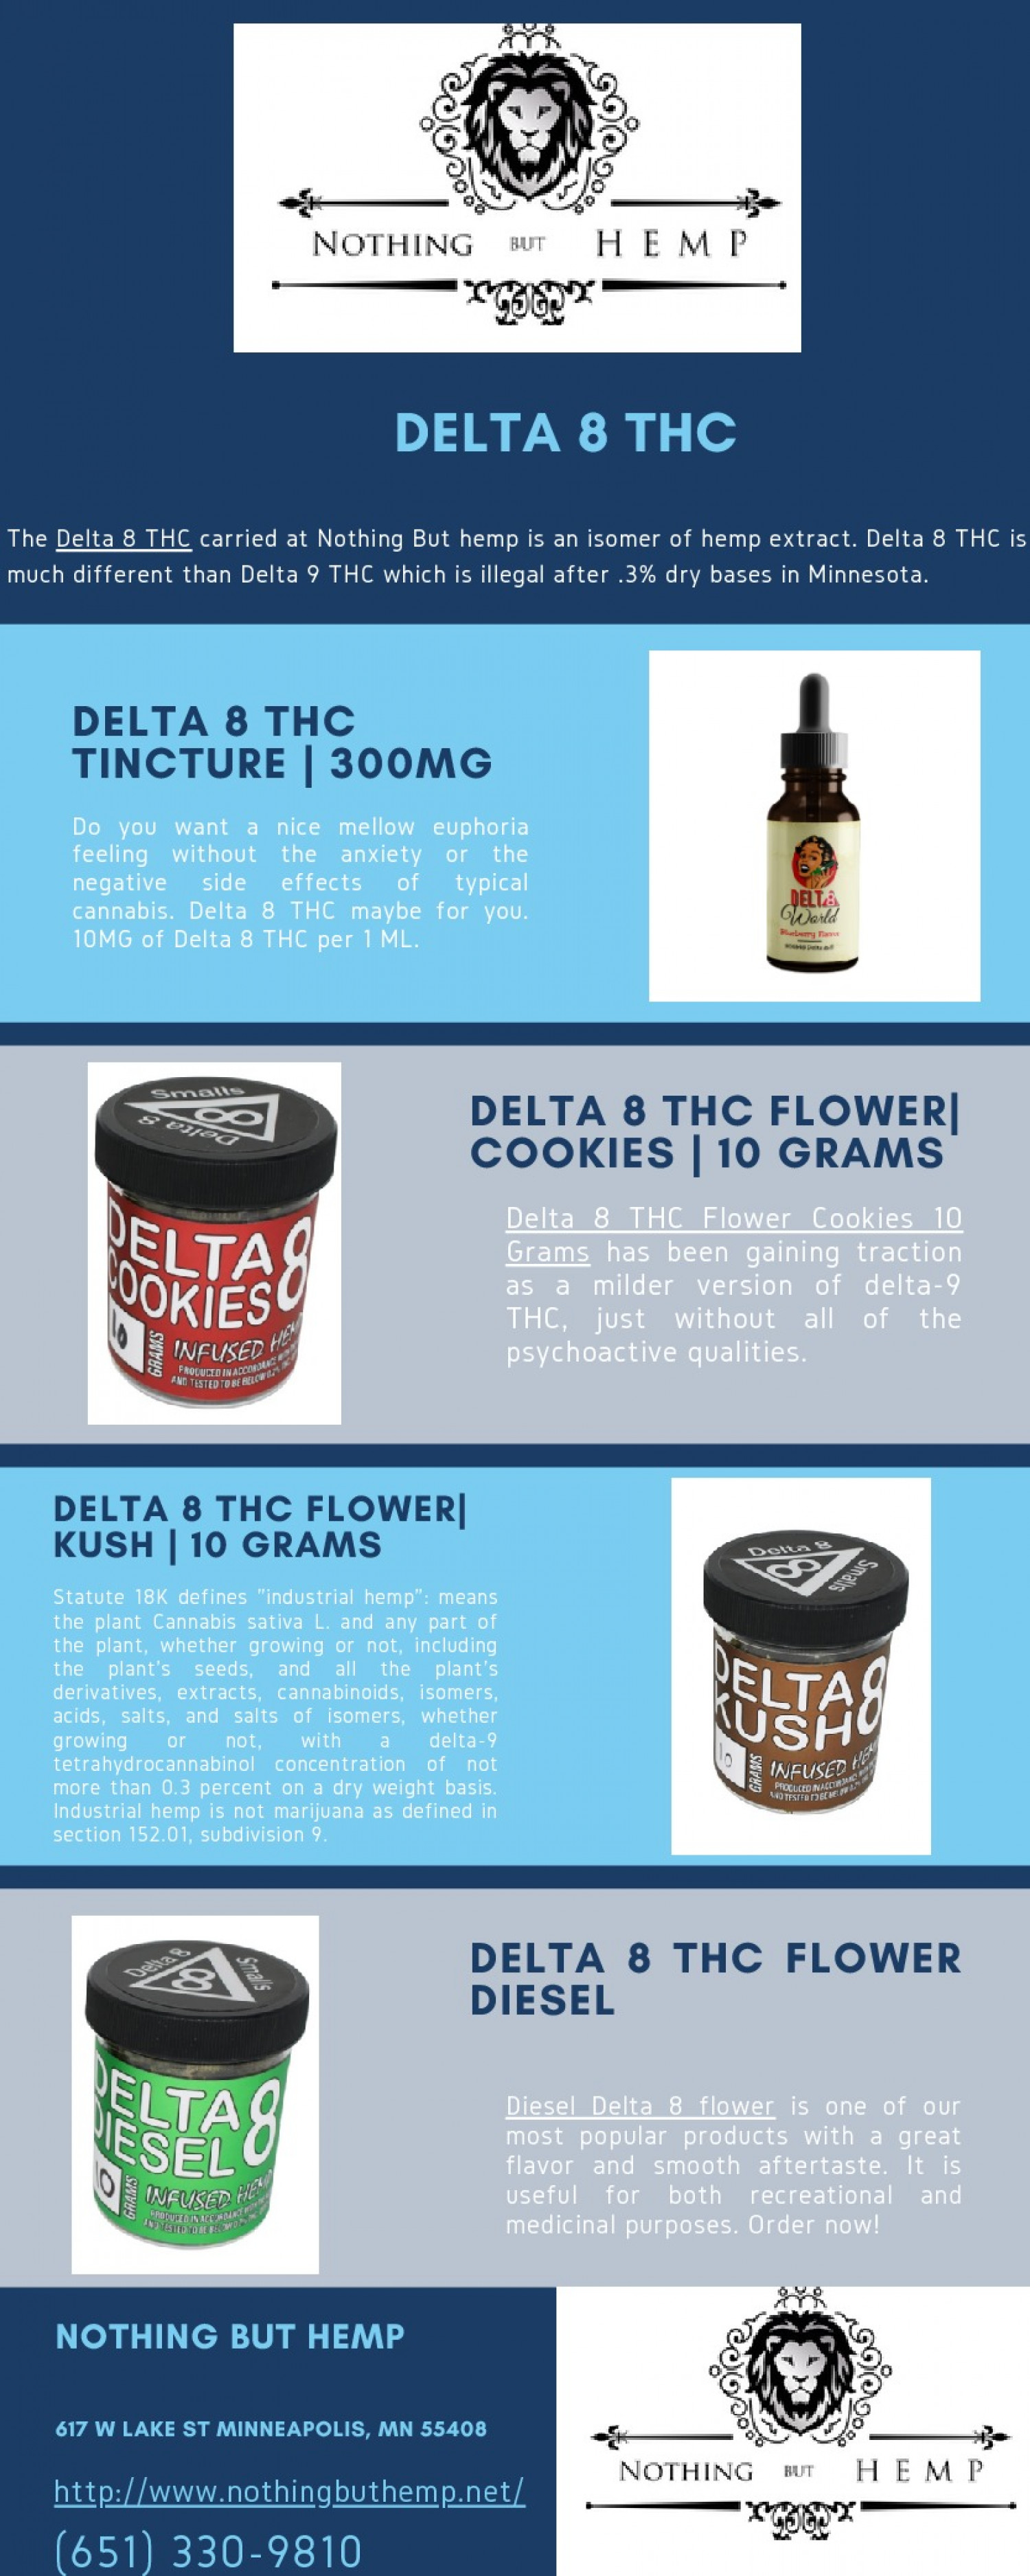 Delta 8 THC Products - Nothing But Hemp   Infographic